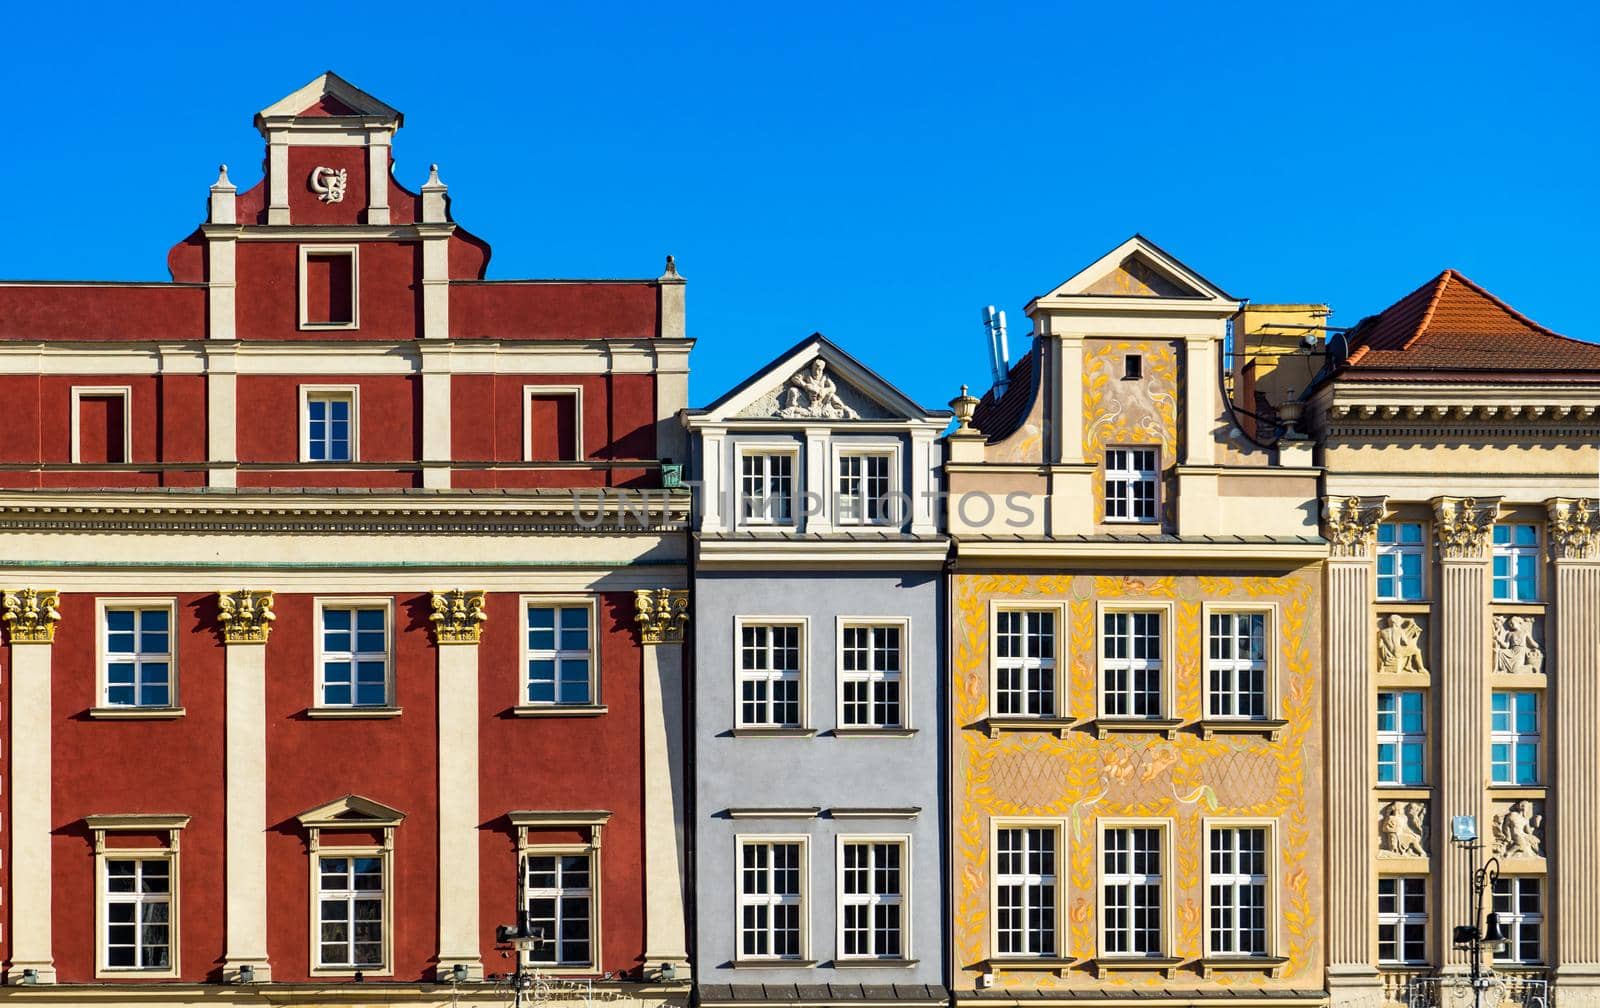 colorful houses in Europe. Old buildings of stone houses decorated in multicolored colors. Color buildings in Poznan, Poland.